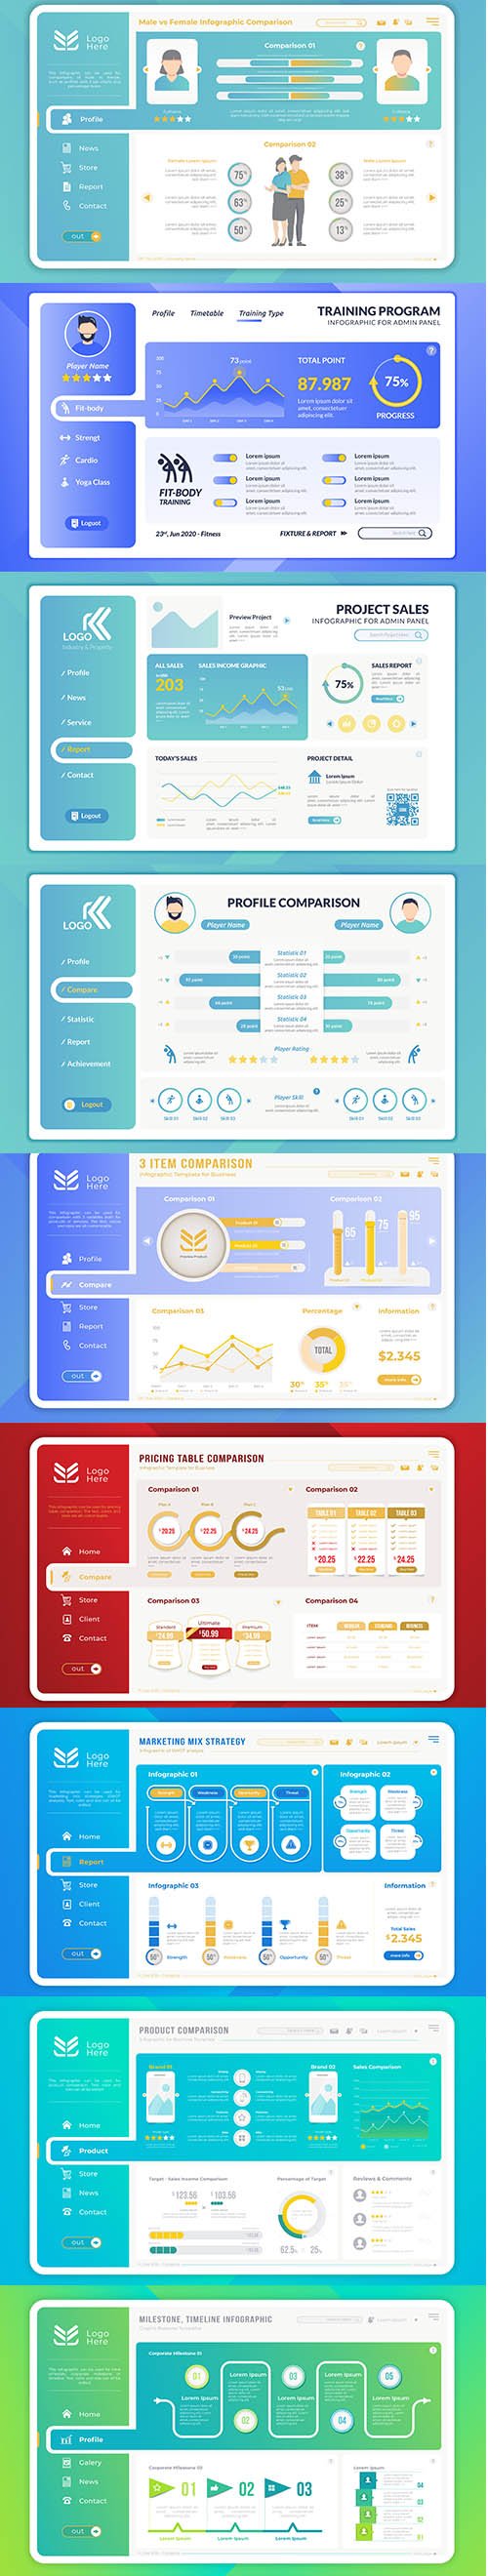 Pricing Table Comparison Infographic